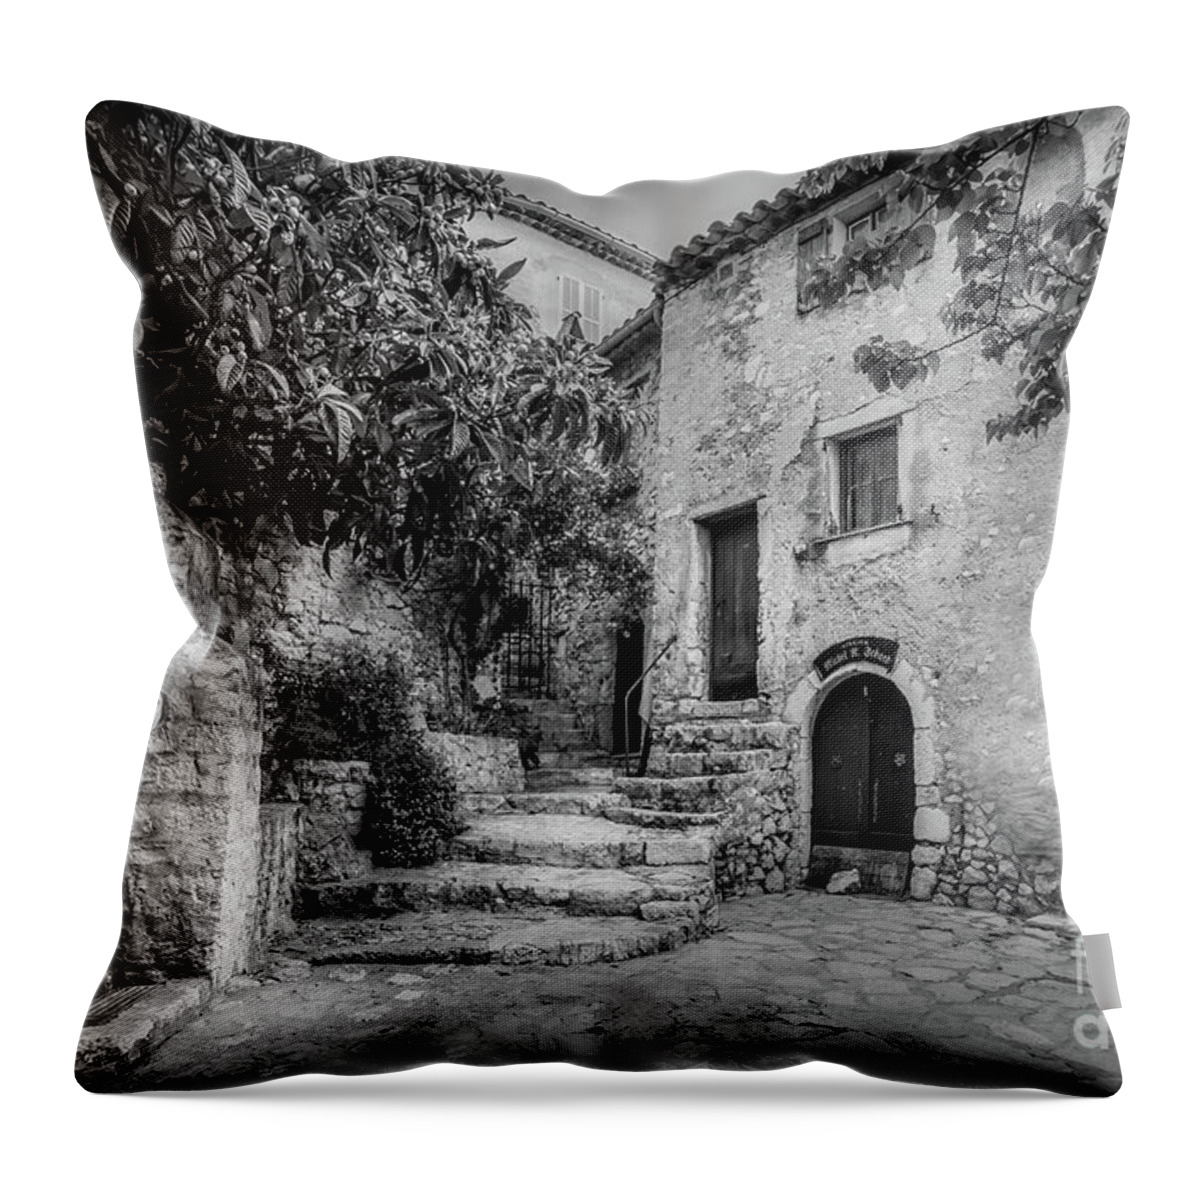 Black And White Throw Pillow featuring the photograph Fountain Courtyard In Eze, France 2, Blk White by Liesl Walsh